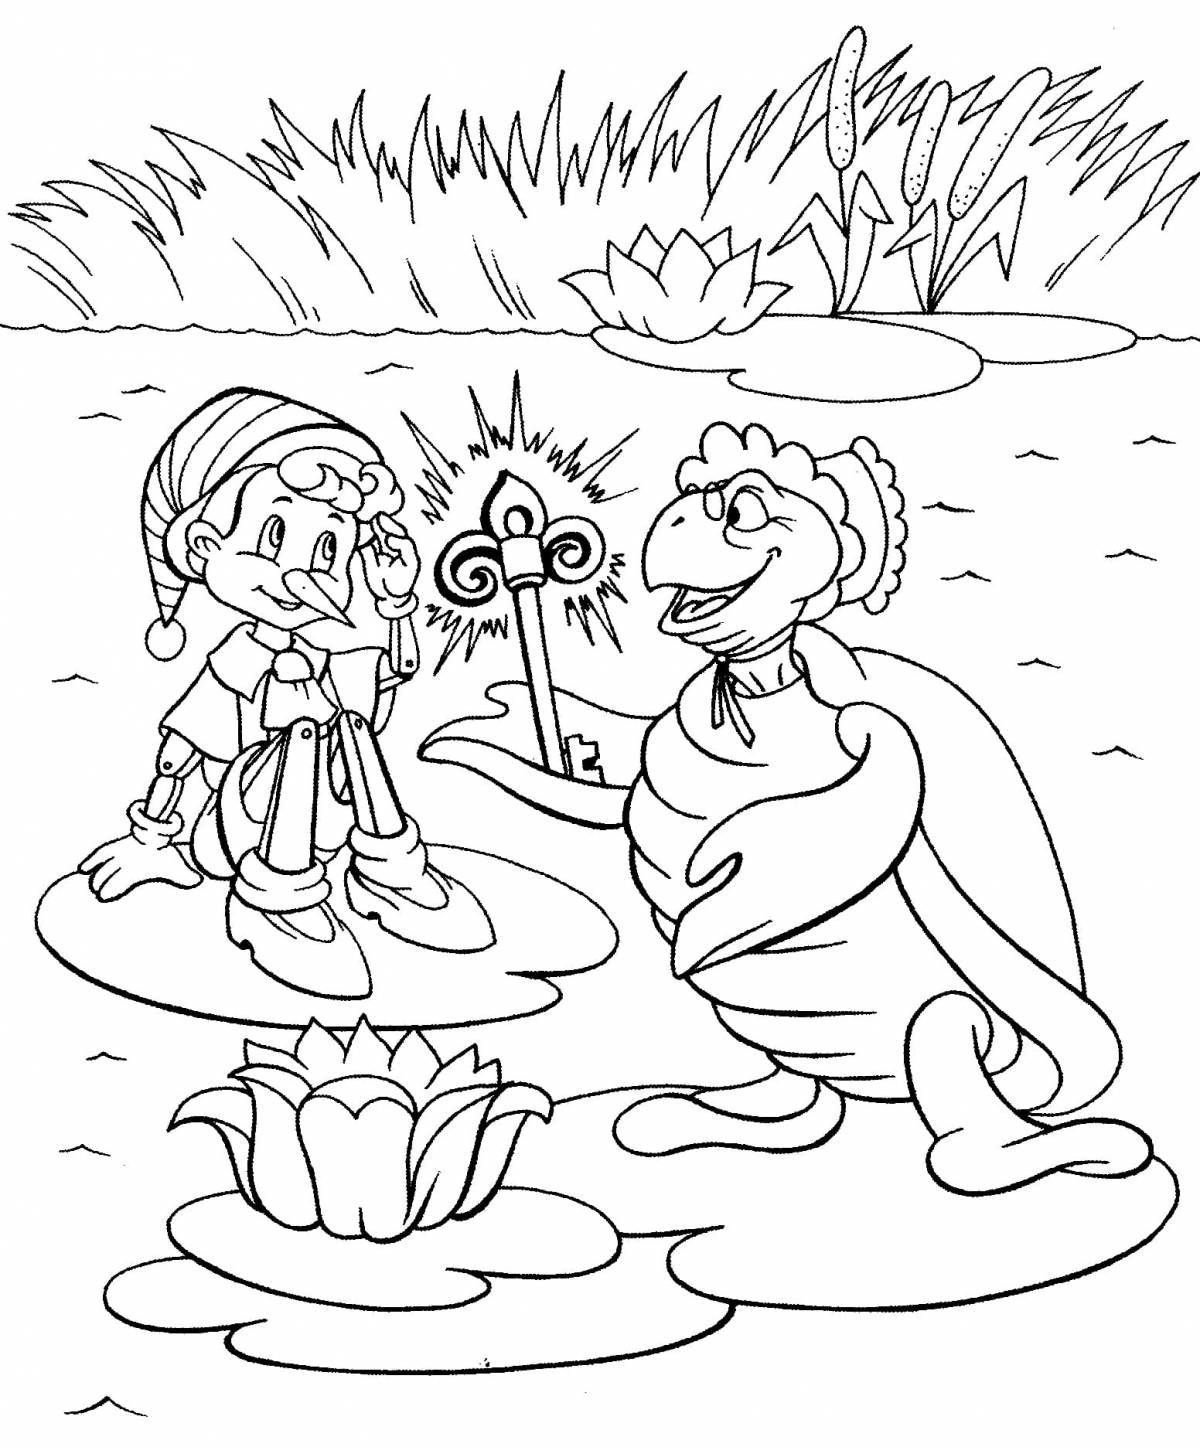 Coloring page dazzling golden key